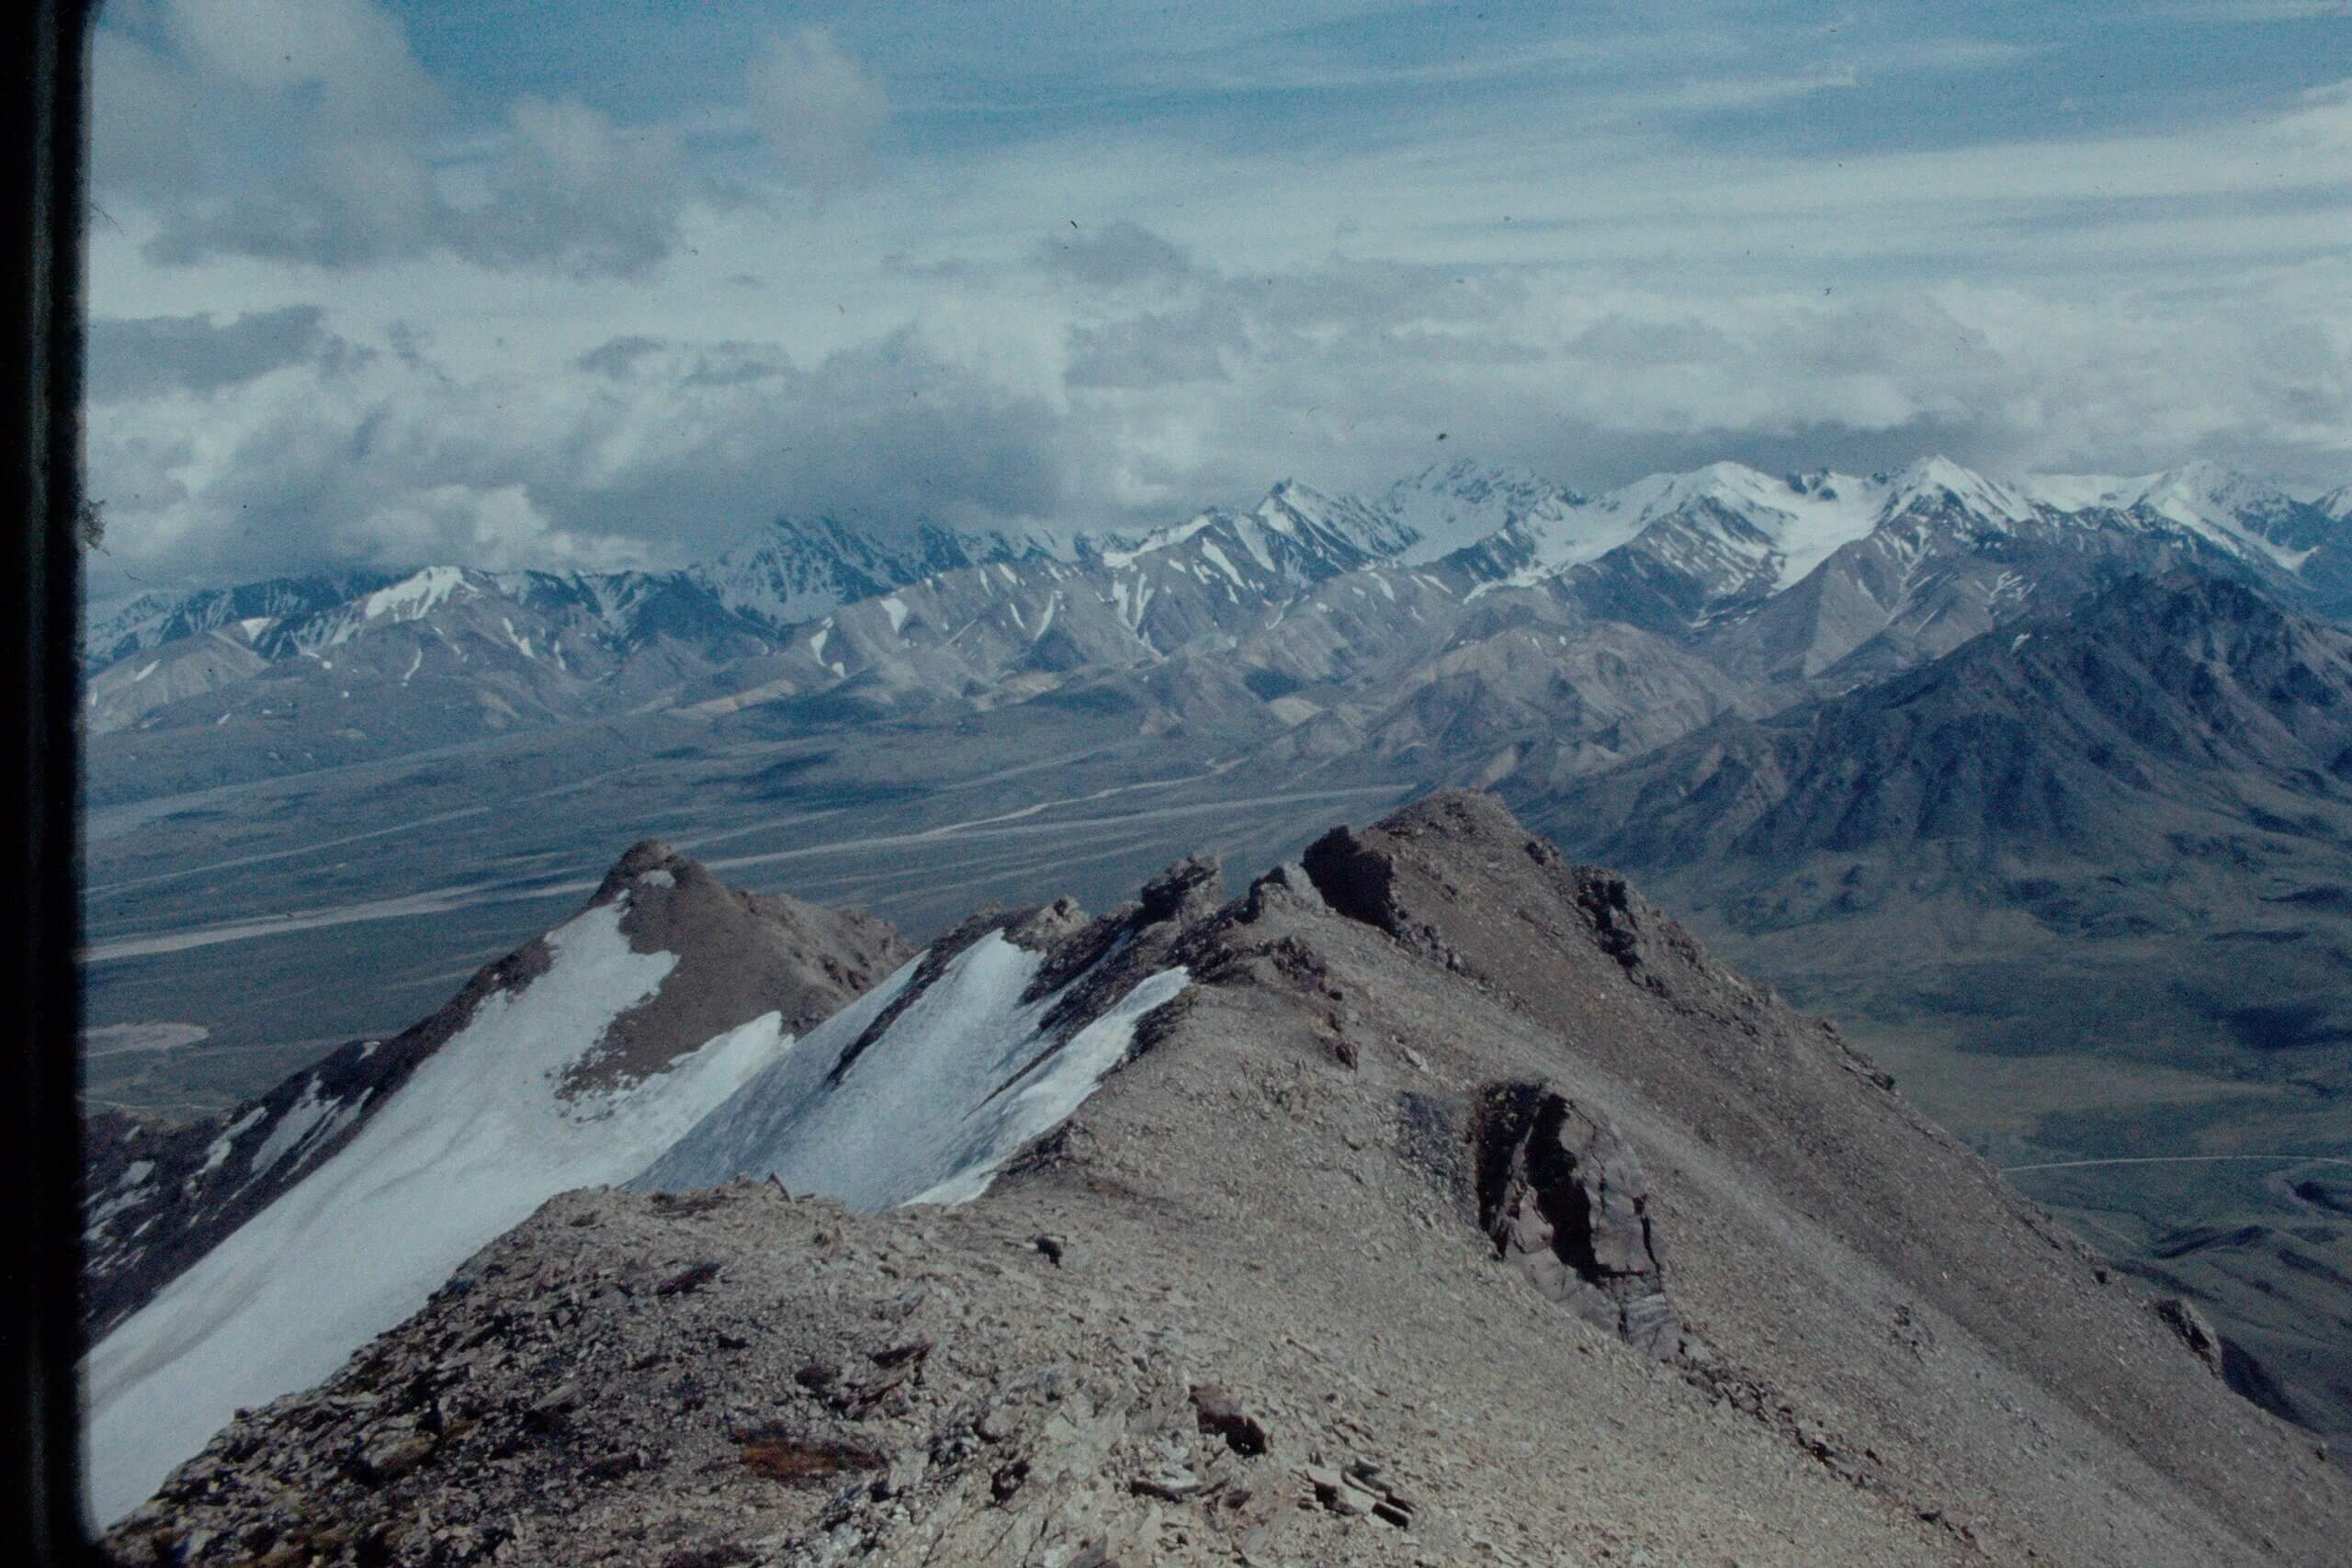 View from Polychrome Mountain, Denali National Park - 1970